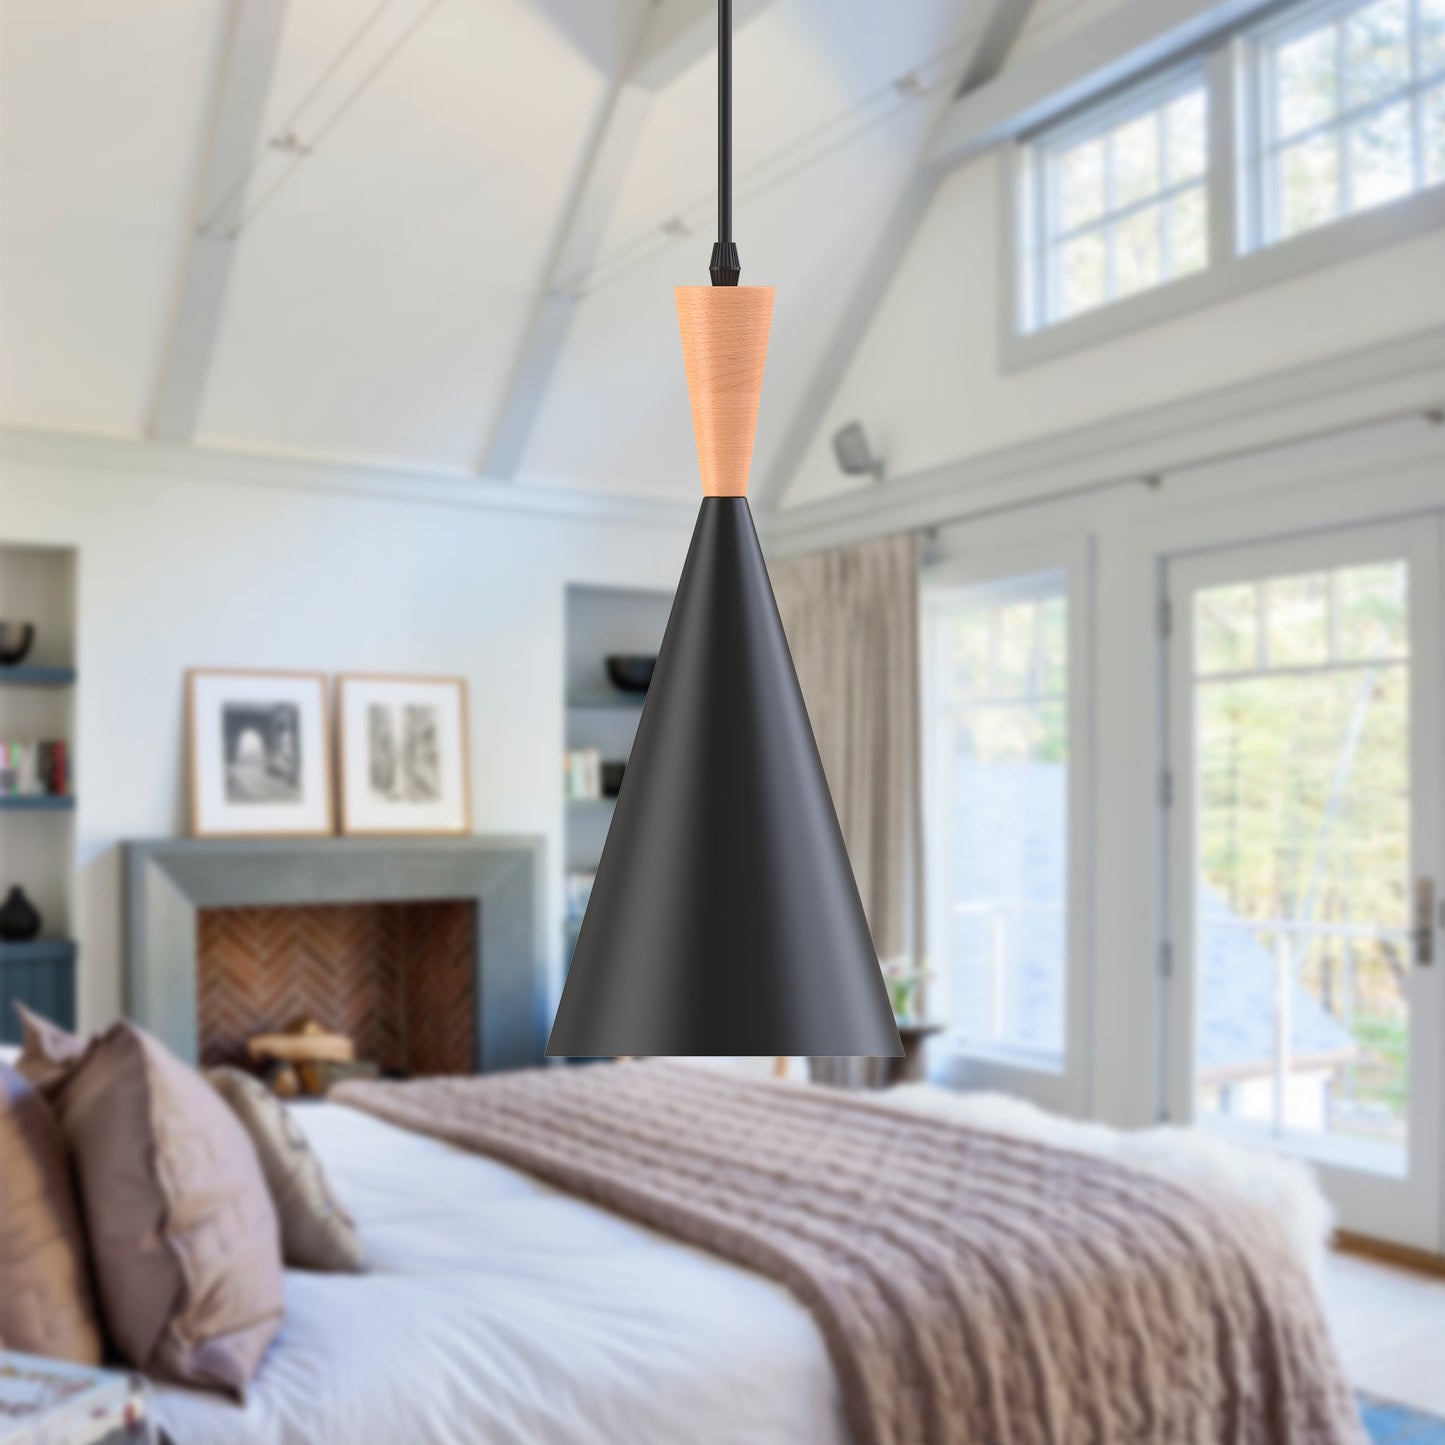 1-Light Matte Black Pendant Light with Metal Shade and Wood